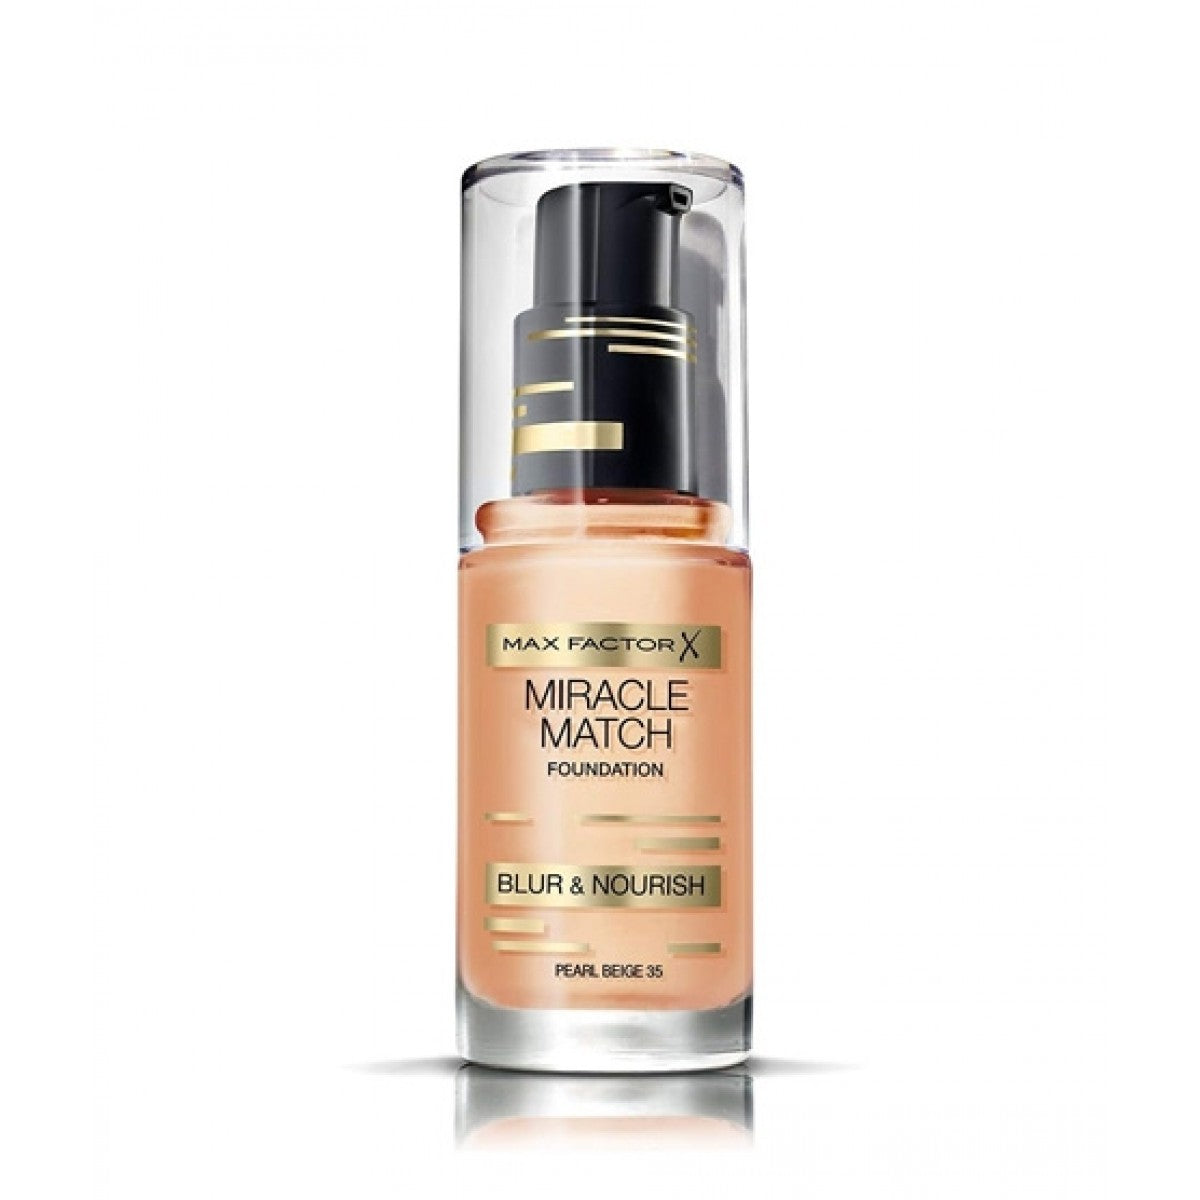 Max Factor - Miracle Match Foundation - 35 Pearl Beige